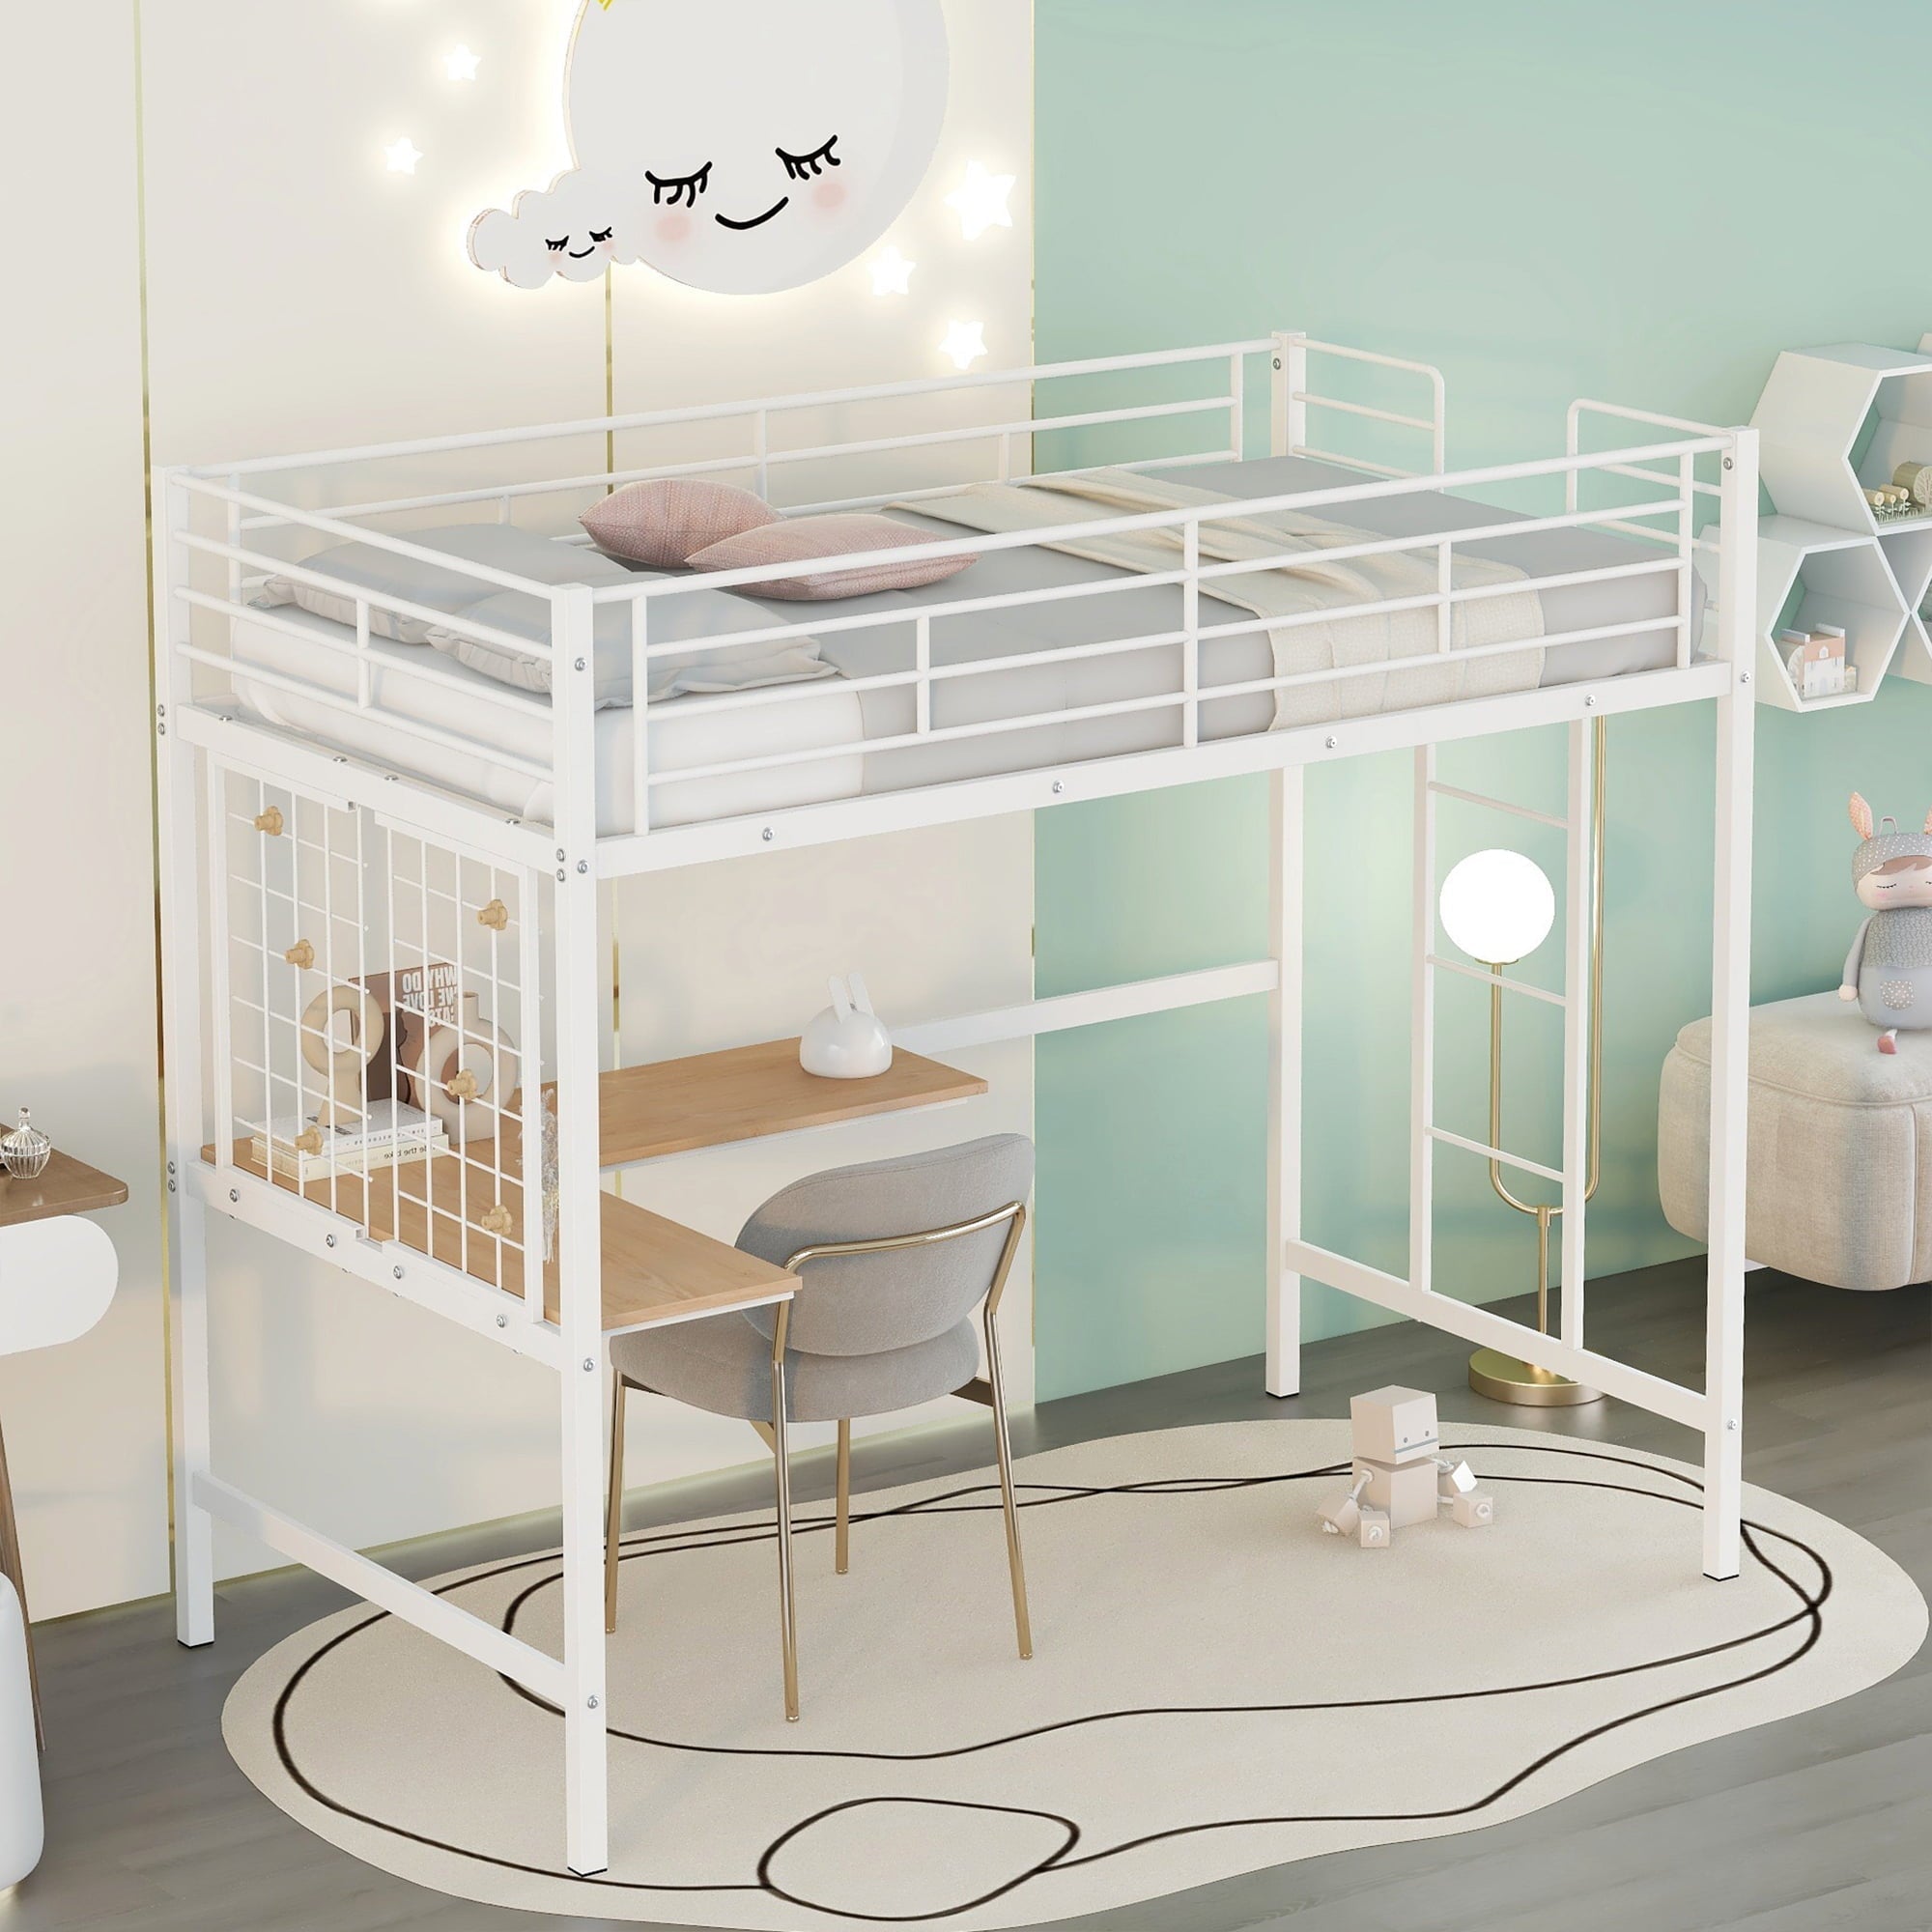 SYNGAR Twin Loft Bed Frame, Twin Loft Bunk Bed Frame with Ladder for Boys Girls Teens Adults, No Box Spring Needed, White